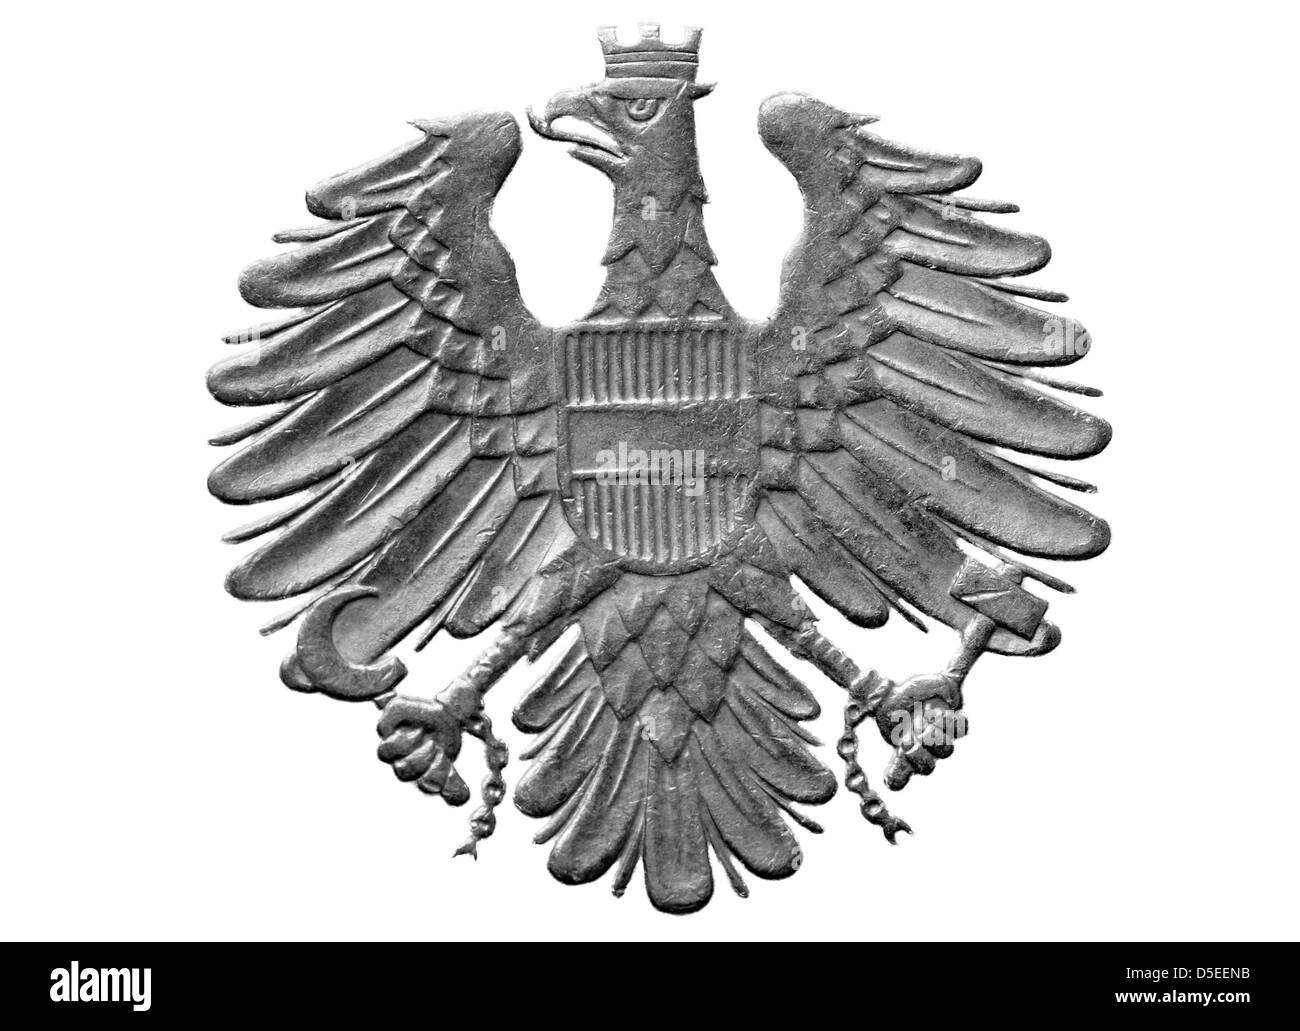 Eagle, Austrian coat of arms from 10 Schilling coin, Austria, 1991, on white background Stock Photo